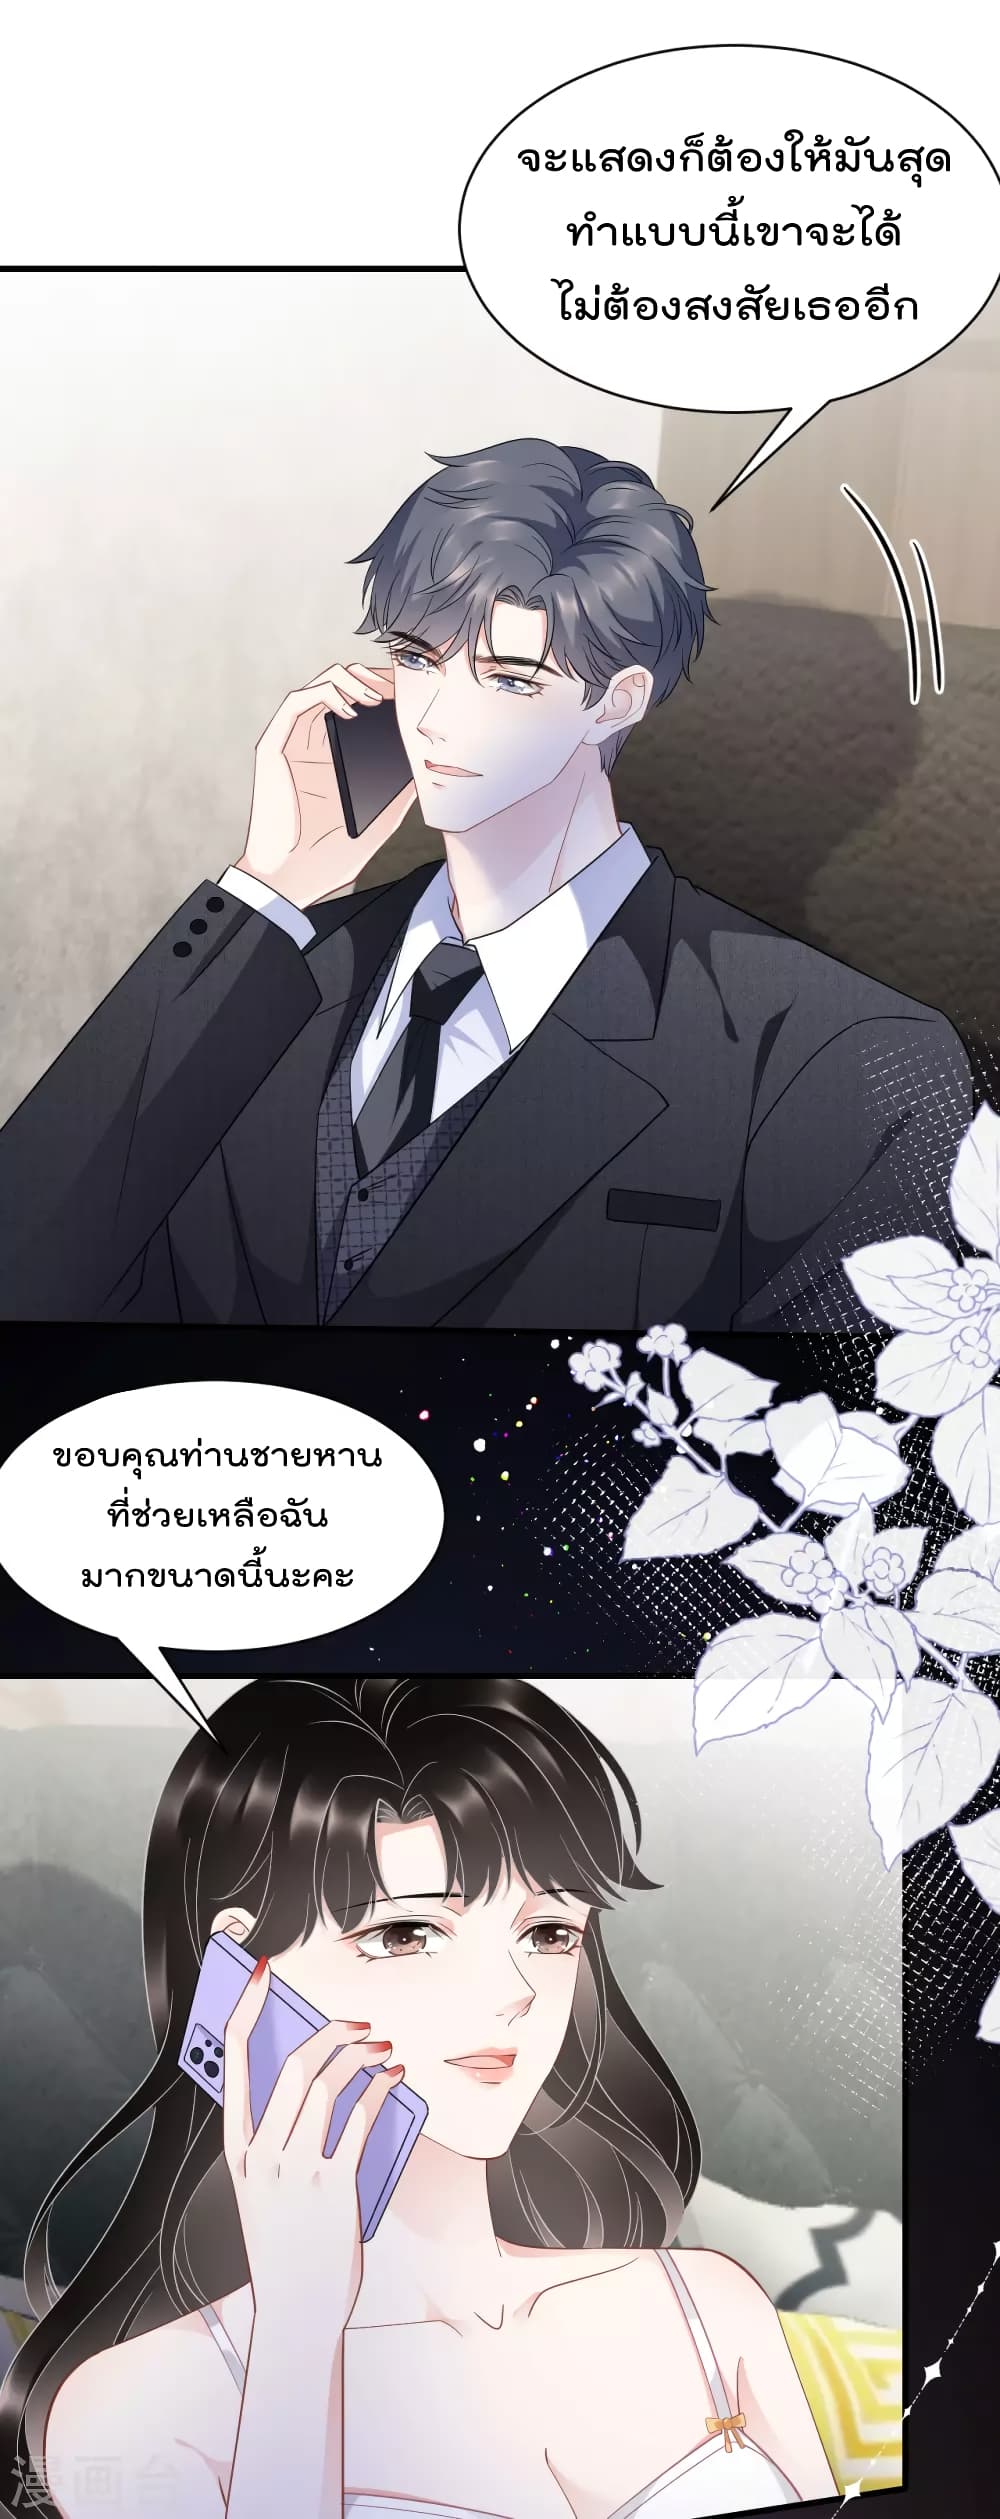 What Can the Eldest Lady Have คุณหนูใหญ่ ทำไมคุณร้ายอย่างนี้ 34-34